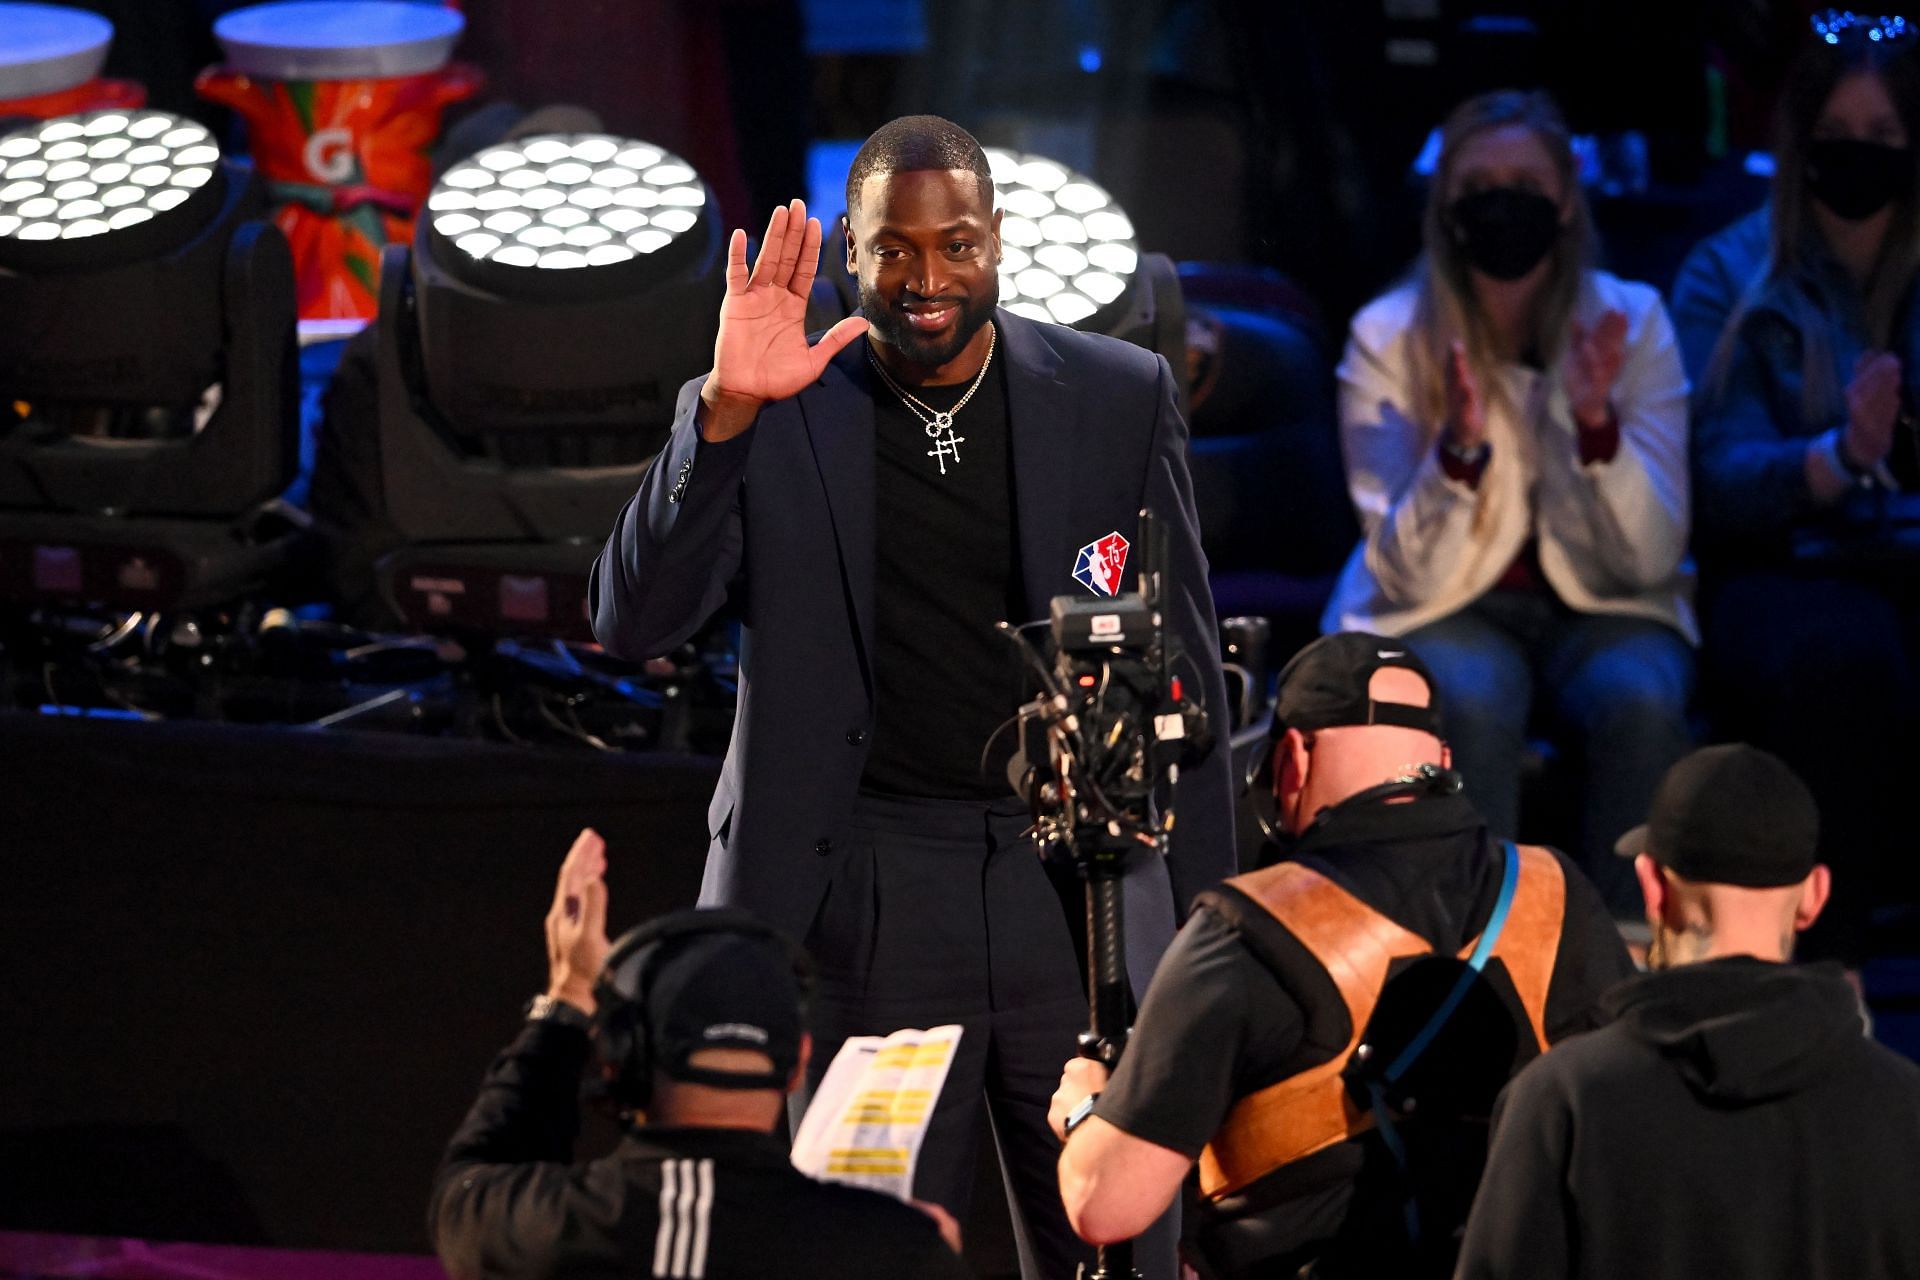 Enter caption Enter caption Dwyane Wade reacts after being introduced as part of the NBA 75th Anniversary Team during the 2022 NBA All-Star Game at Rocket Mortgage Fieldhouse on February 20, 2022 in Cleveland, Ohio.